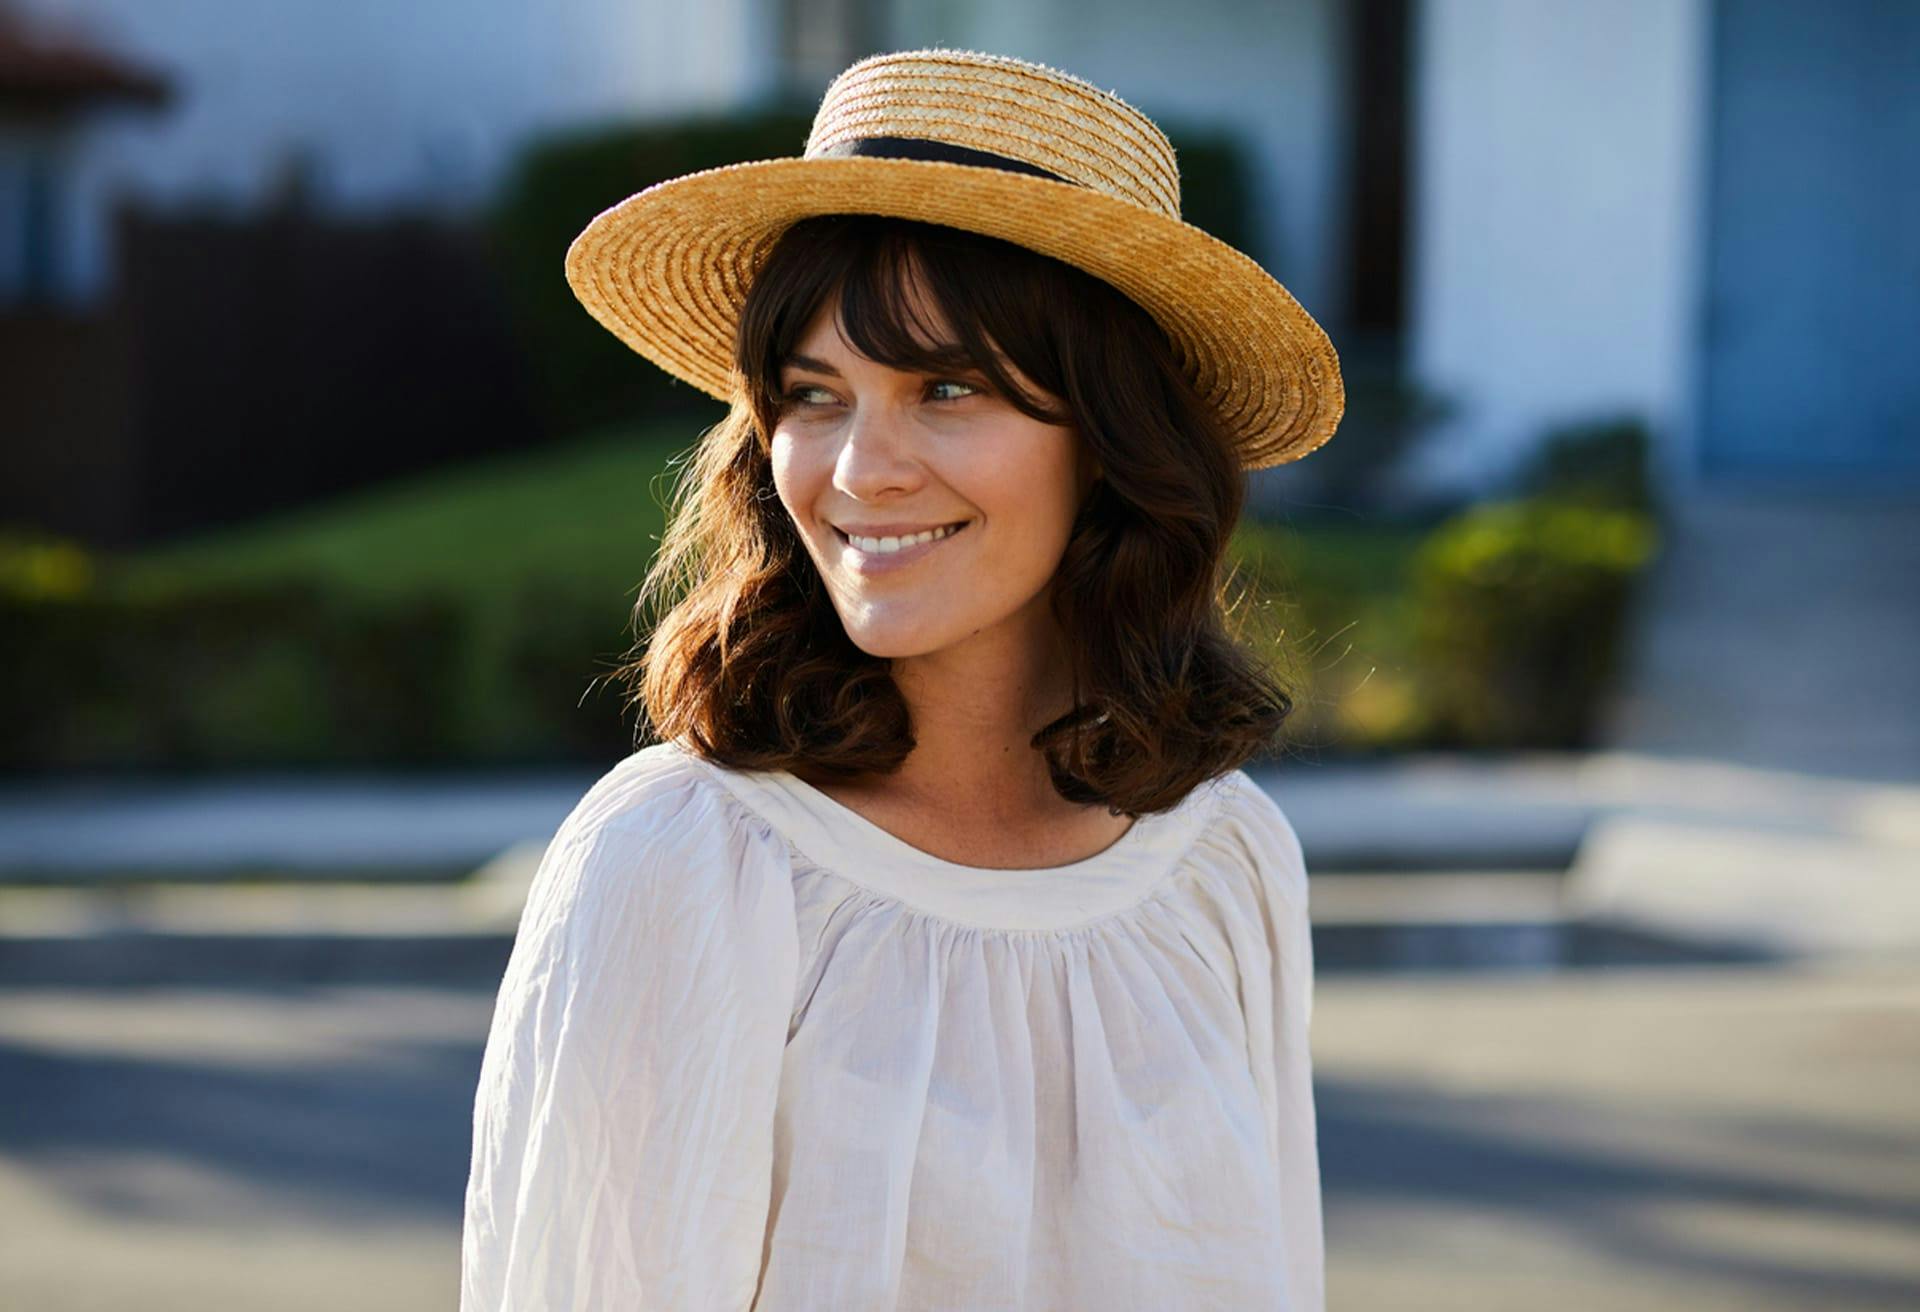 brunette woman outsite wearing a white shirt and a tan straw hat